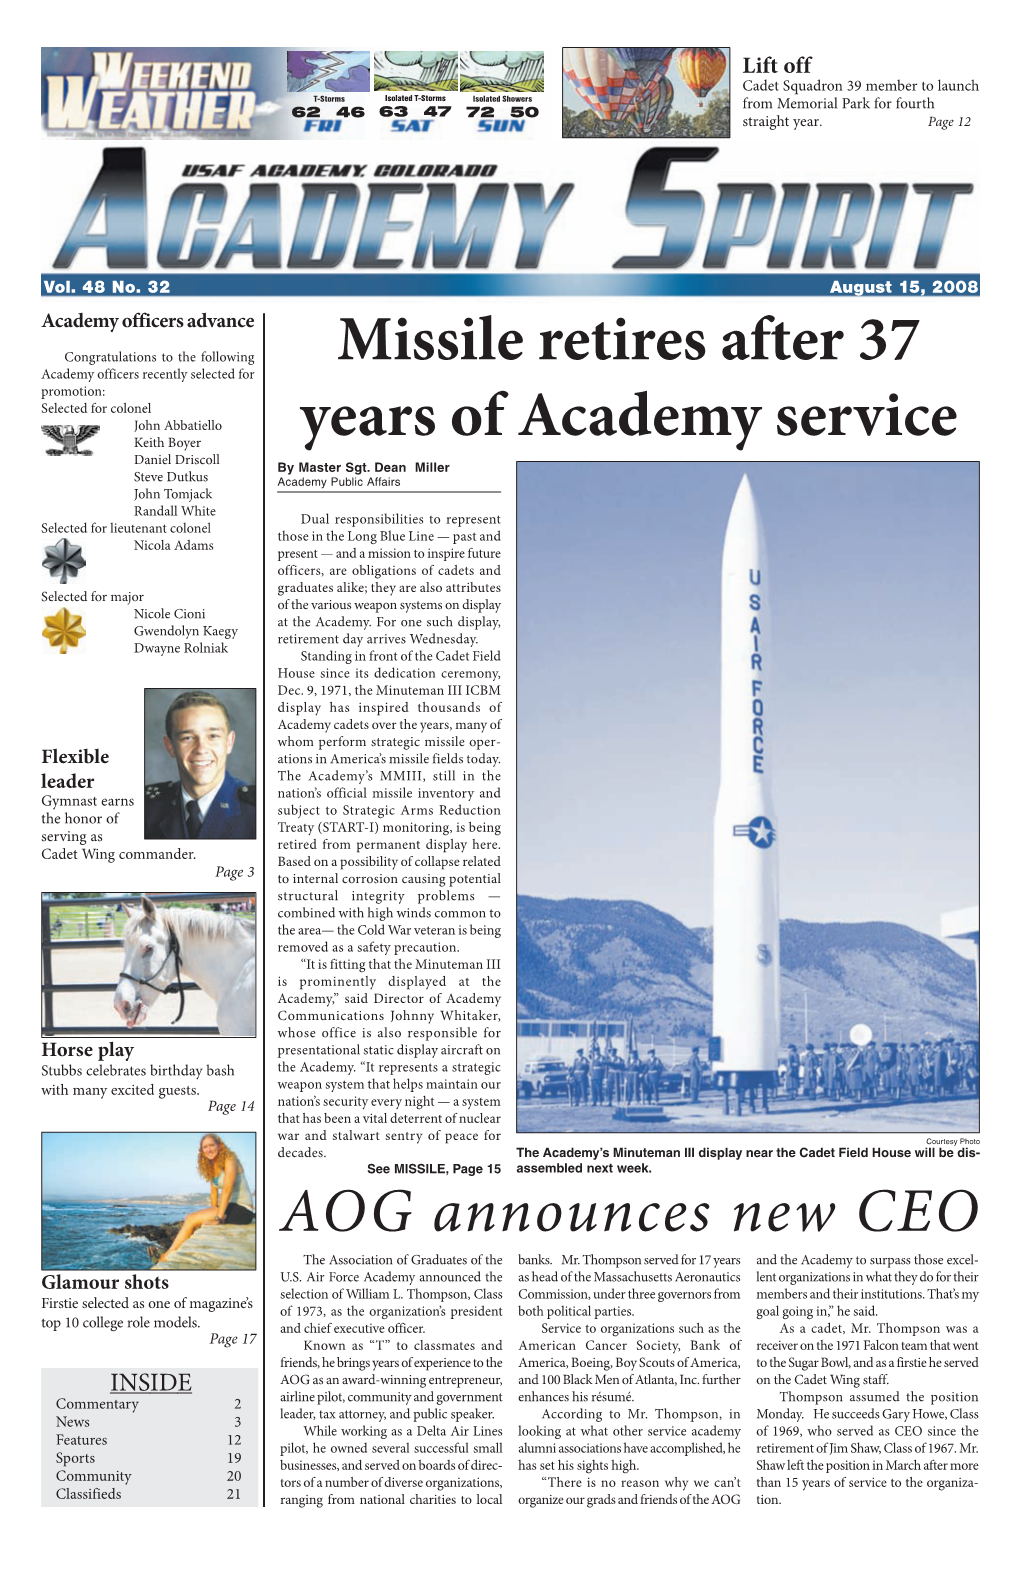 Missile Retires After 37 Years of Academy Service